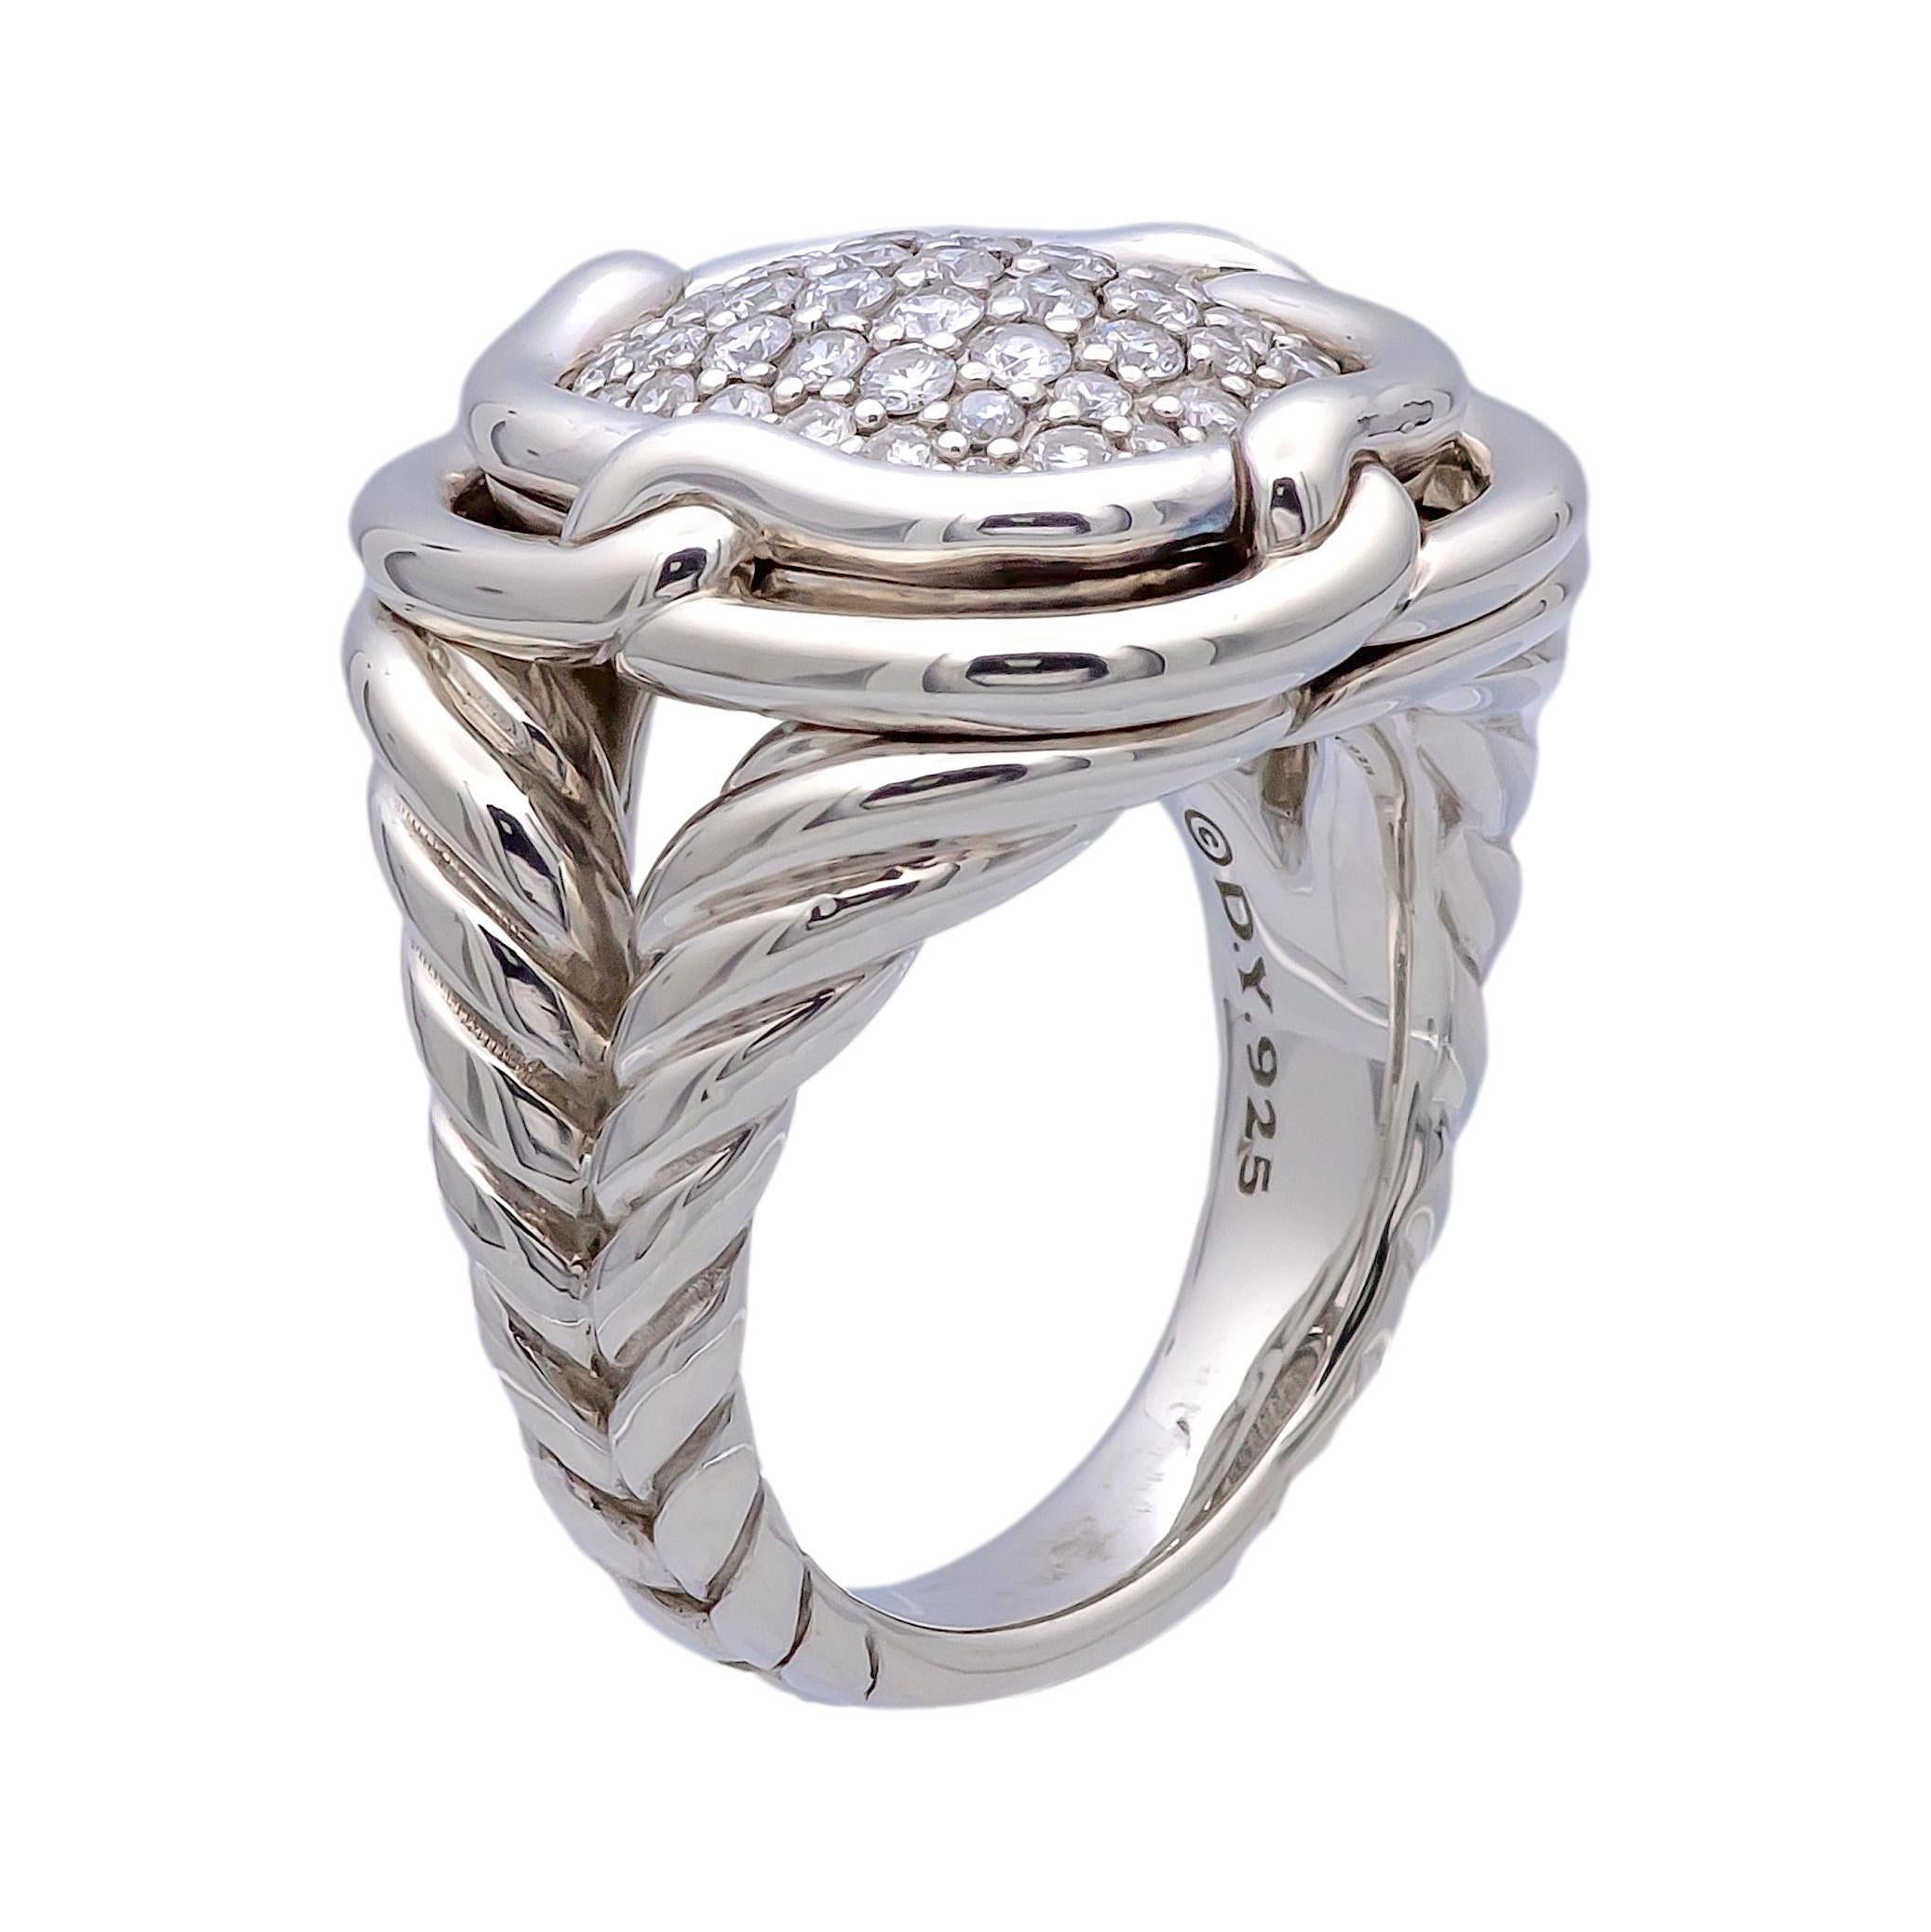 David Yurman ring from the Labyrinth collection finely crafted in sterling silver featuring round brilliant cut pave set diamonds in the center weighing 1.00 carats total weight approximately. Ring has double twisted wire shank with interlocking